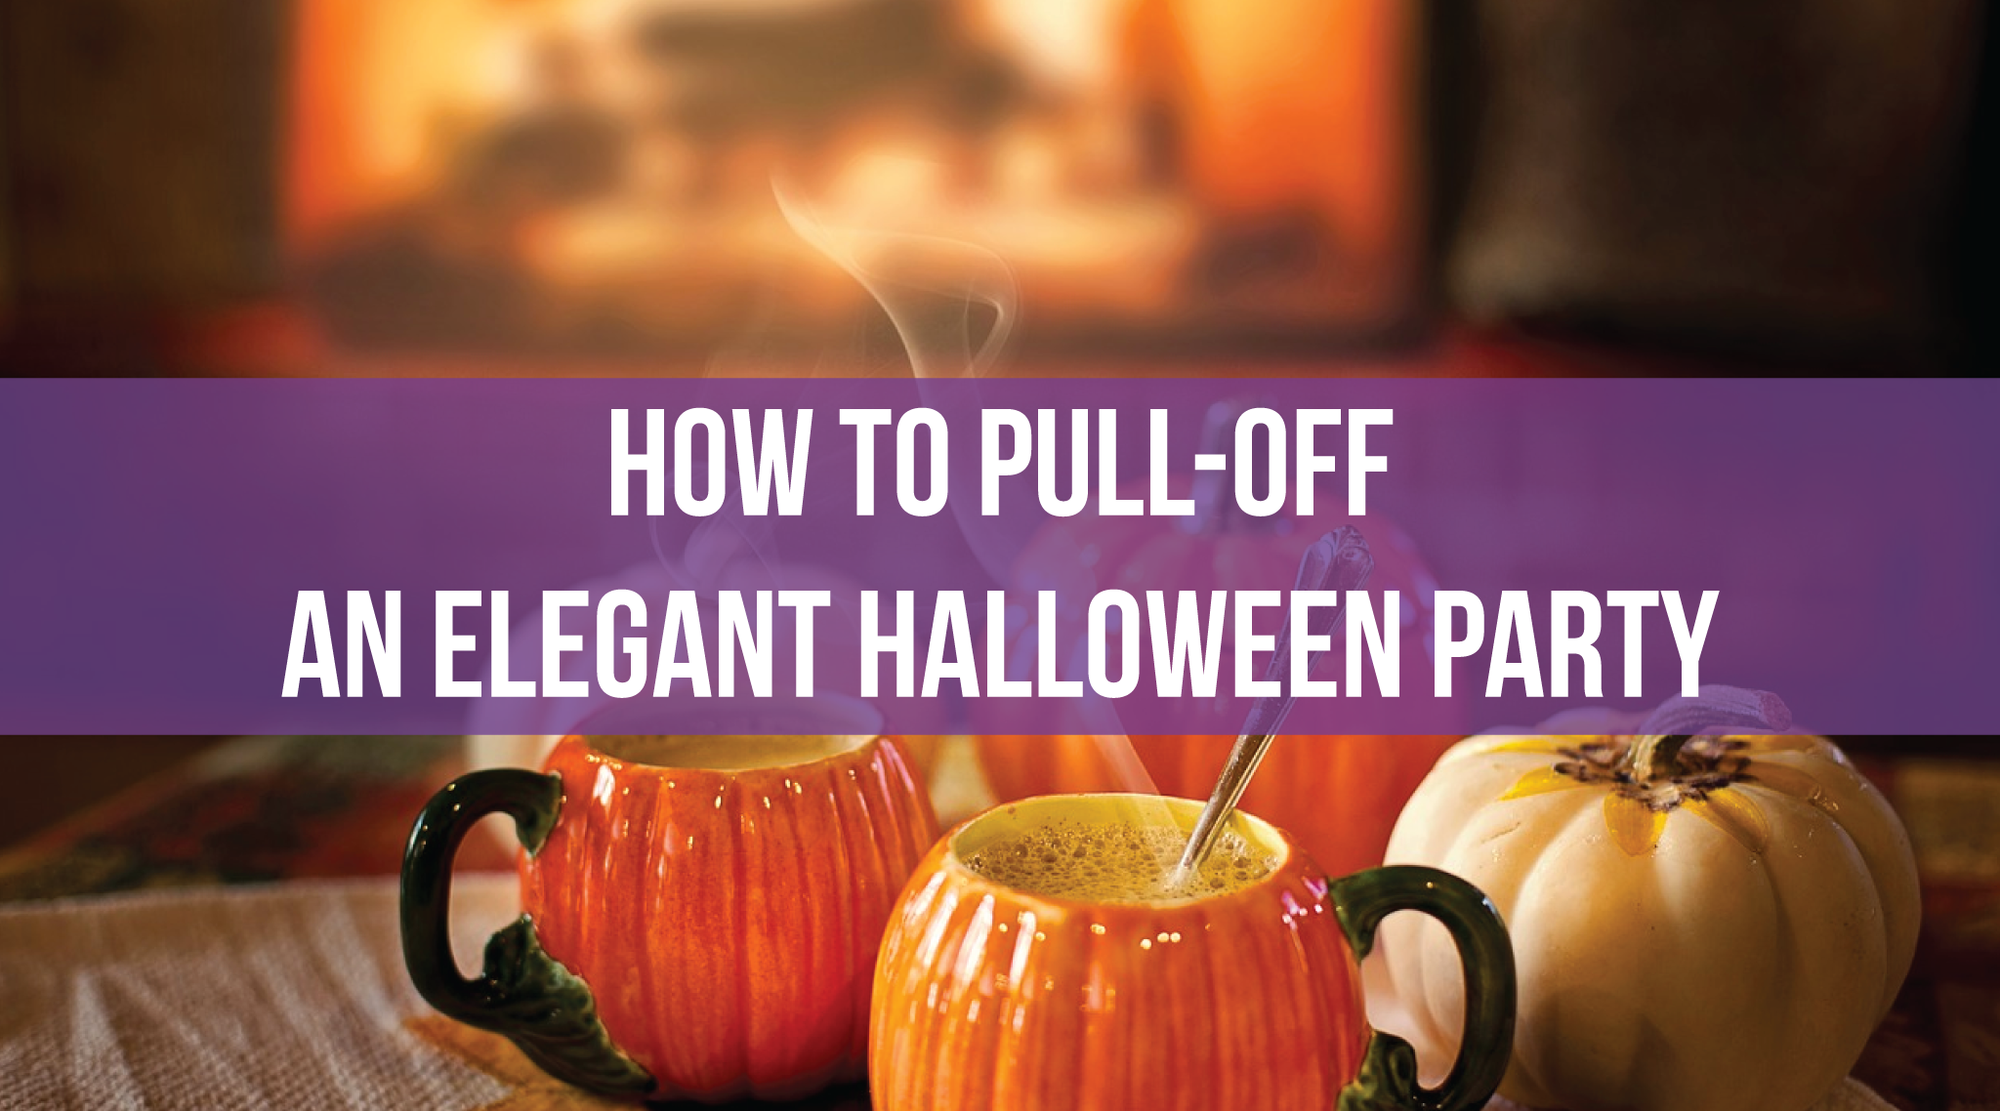 How to Pull-Off an Elegant Halloween Party